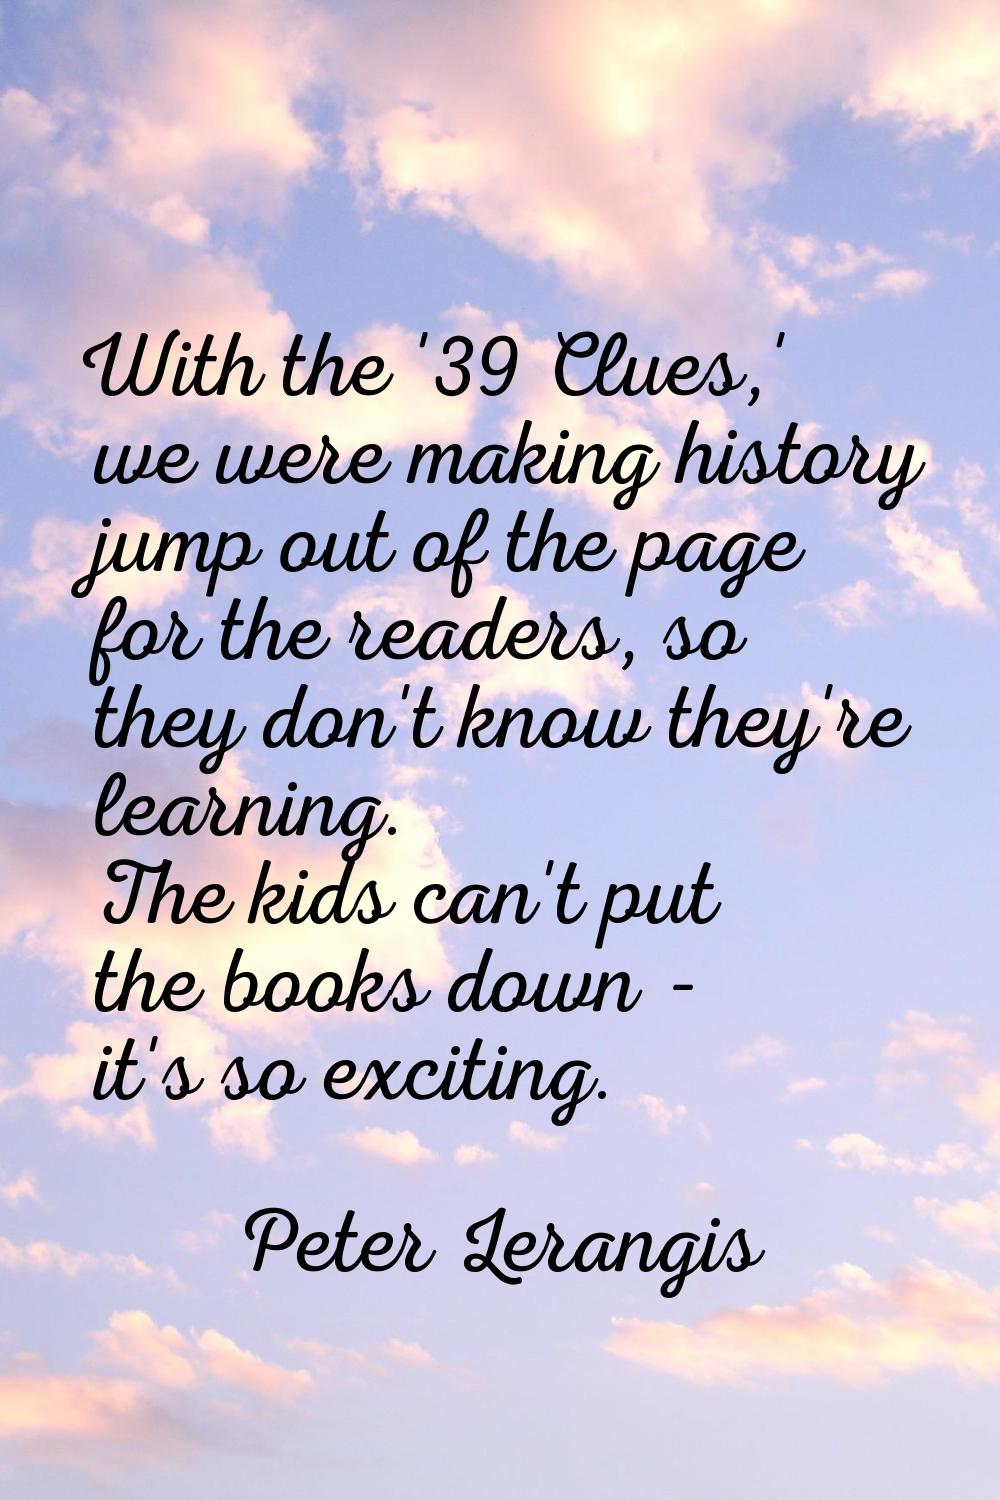 With the '39 Clues,' we were making history jump out of the page for the readers, so they don't kno